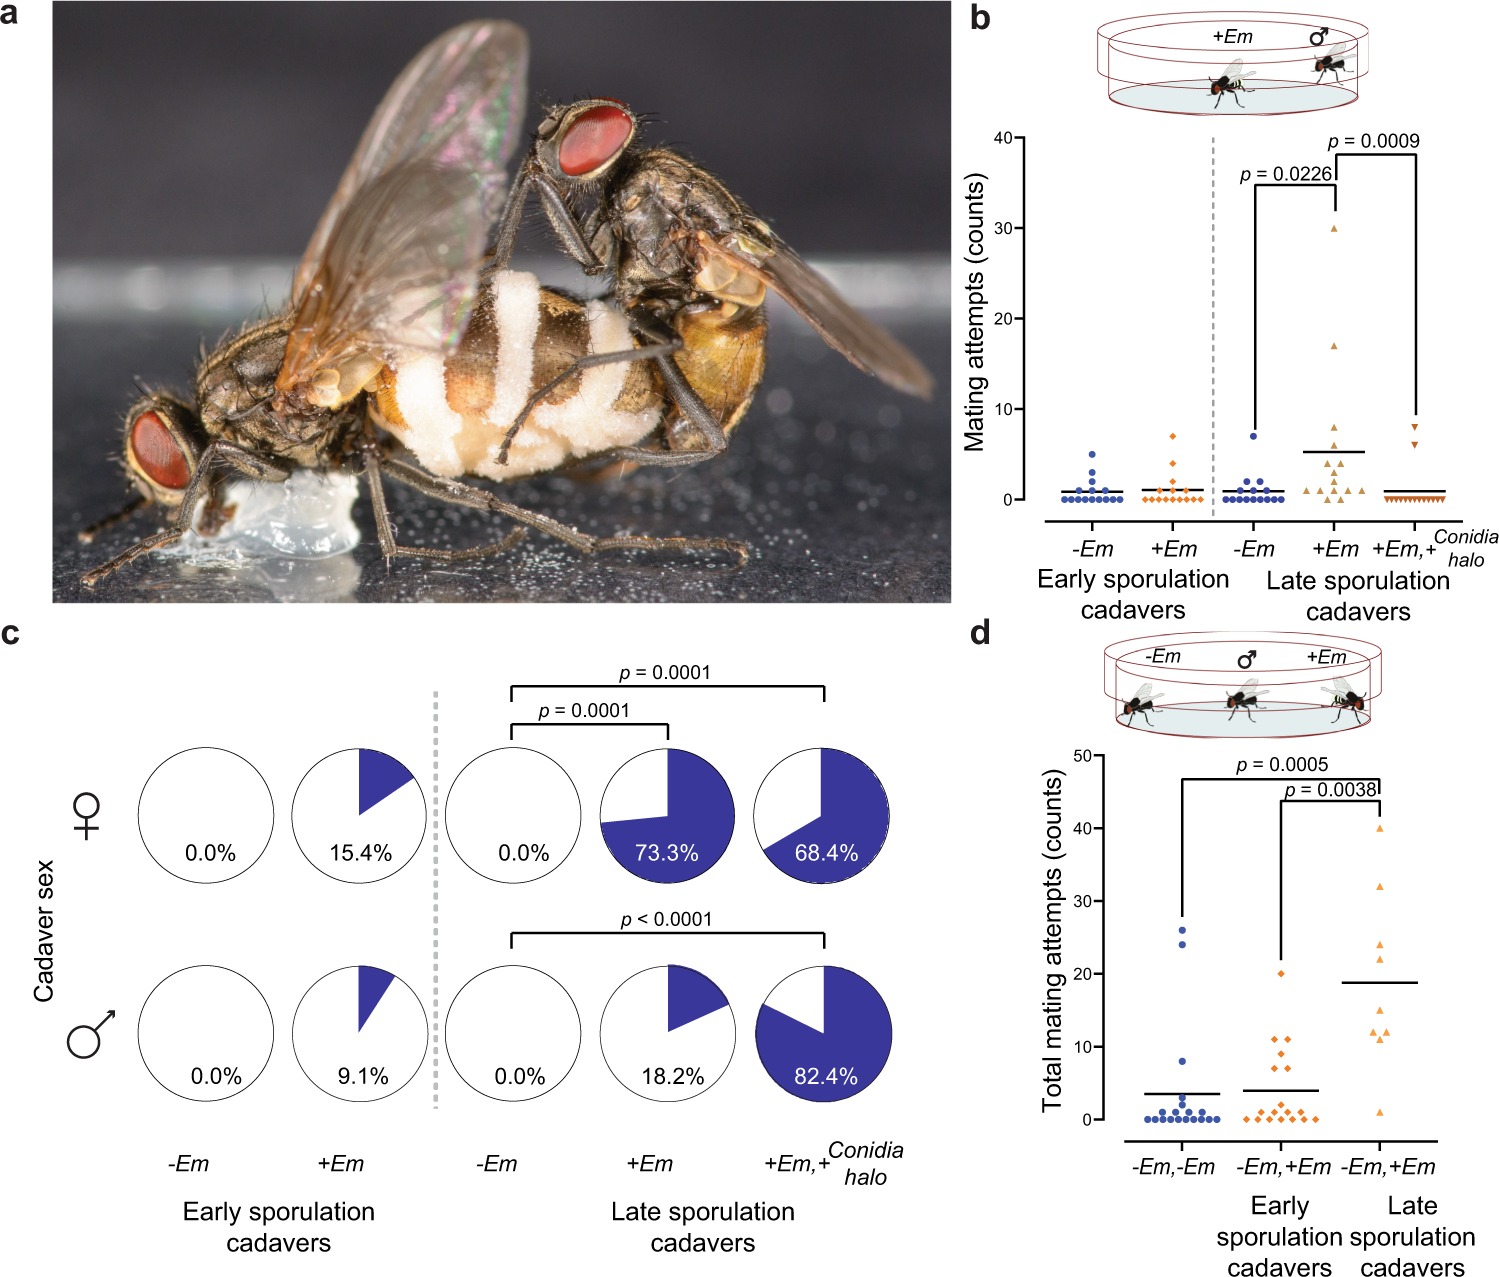 fungus uses volatiles to entice male flies into fatal matings with infected female cadavers | The Journal